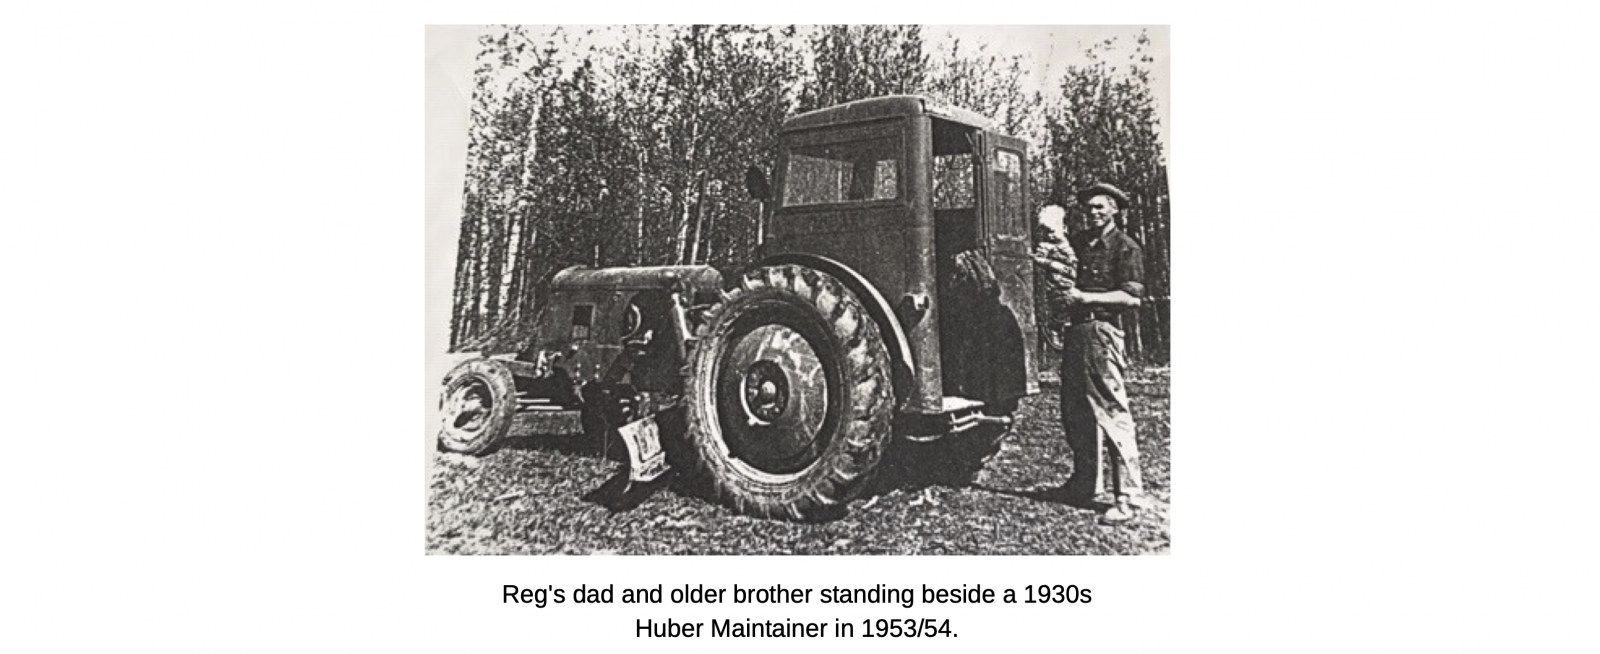 Reg's dad and older brother standing next to a 1930s Huber Maintainer Grader in 1953/54.